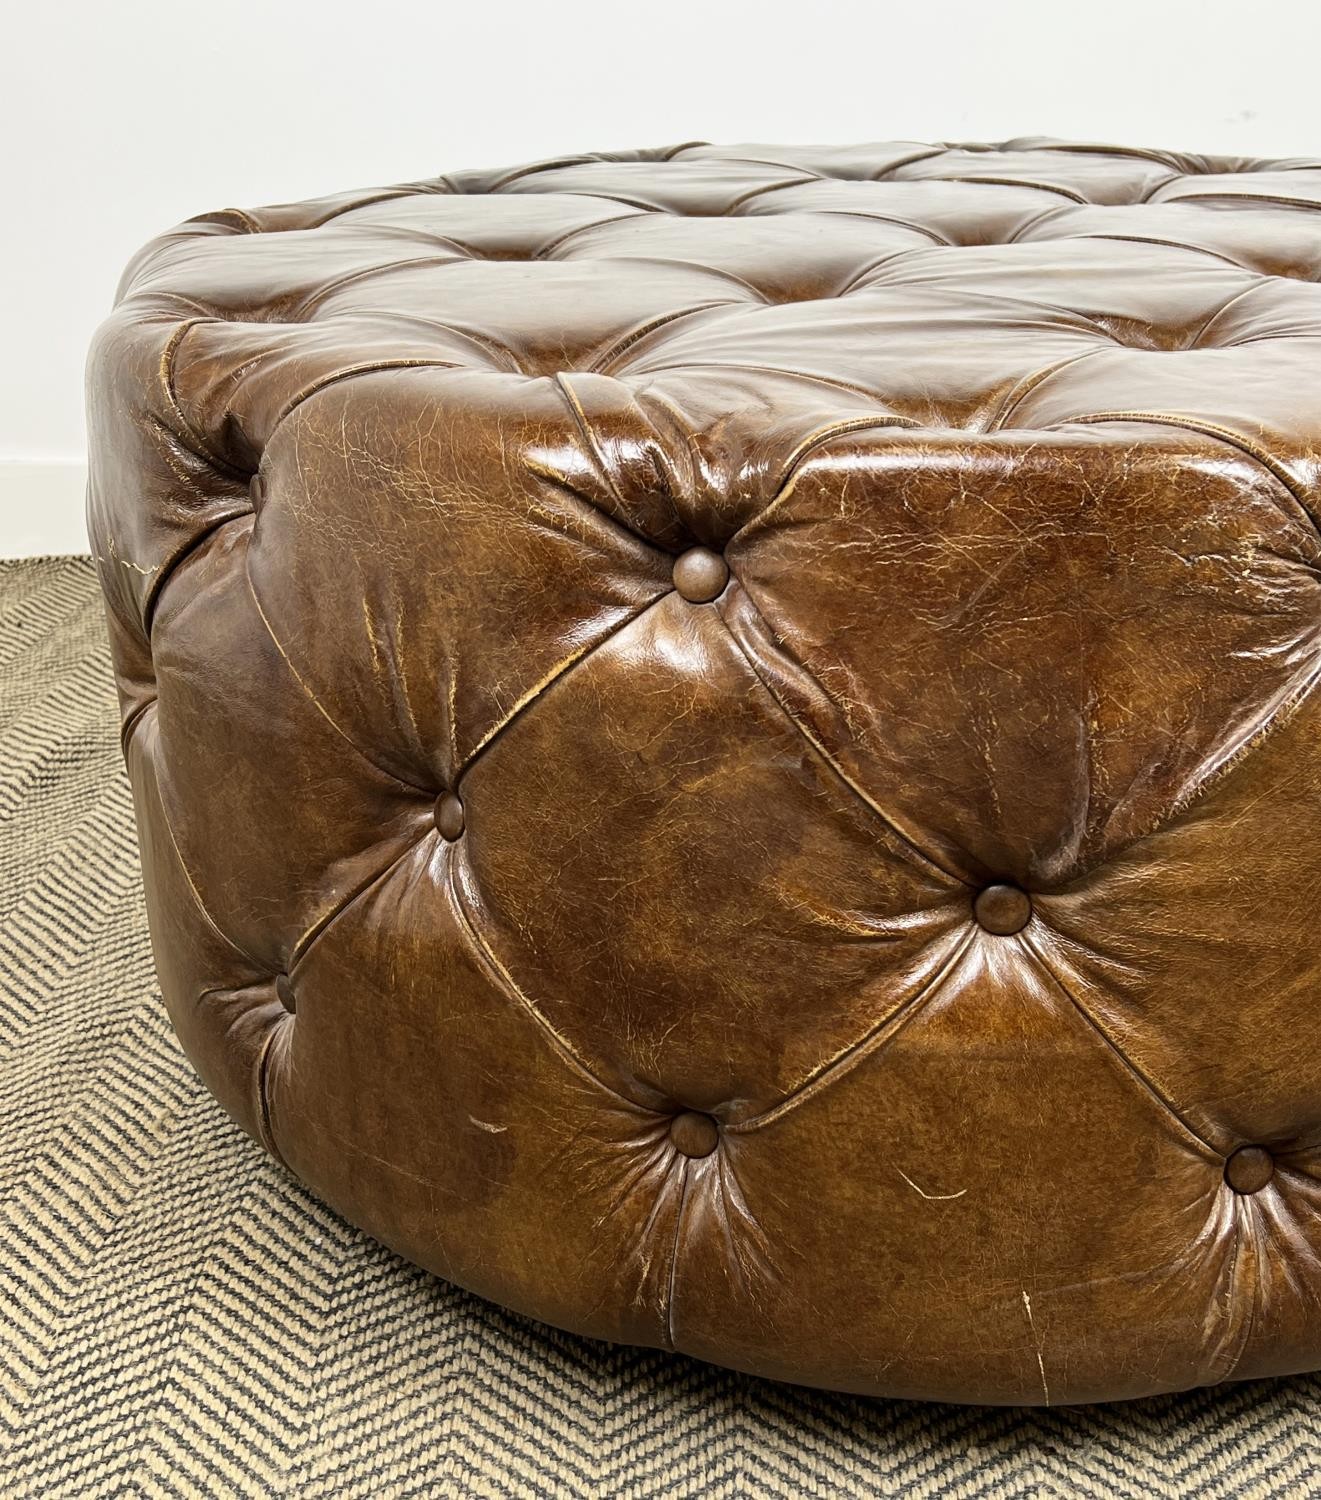 FOOTSTOOL, revolving buttoned hand dyed tanned leather, 55cm H x 98cm diam. - Image 3 of 5